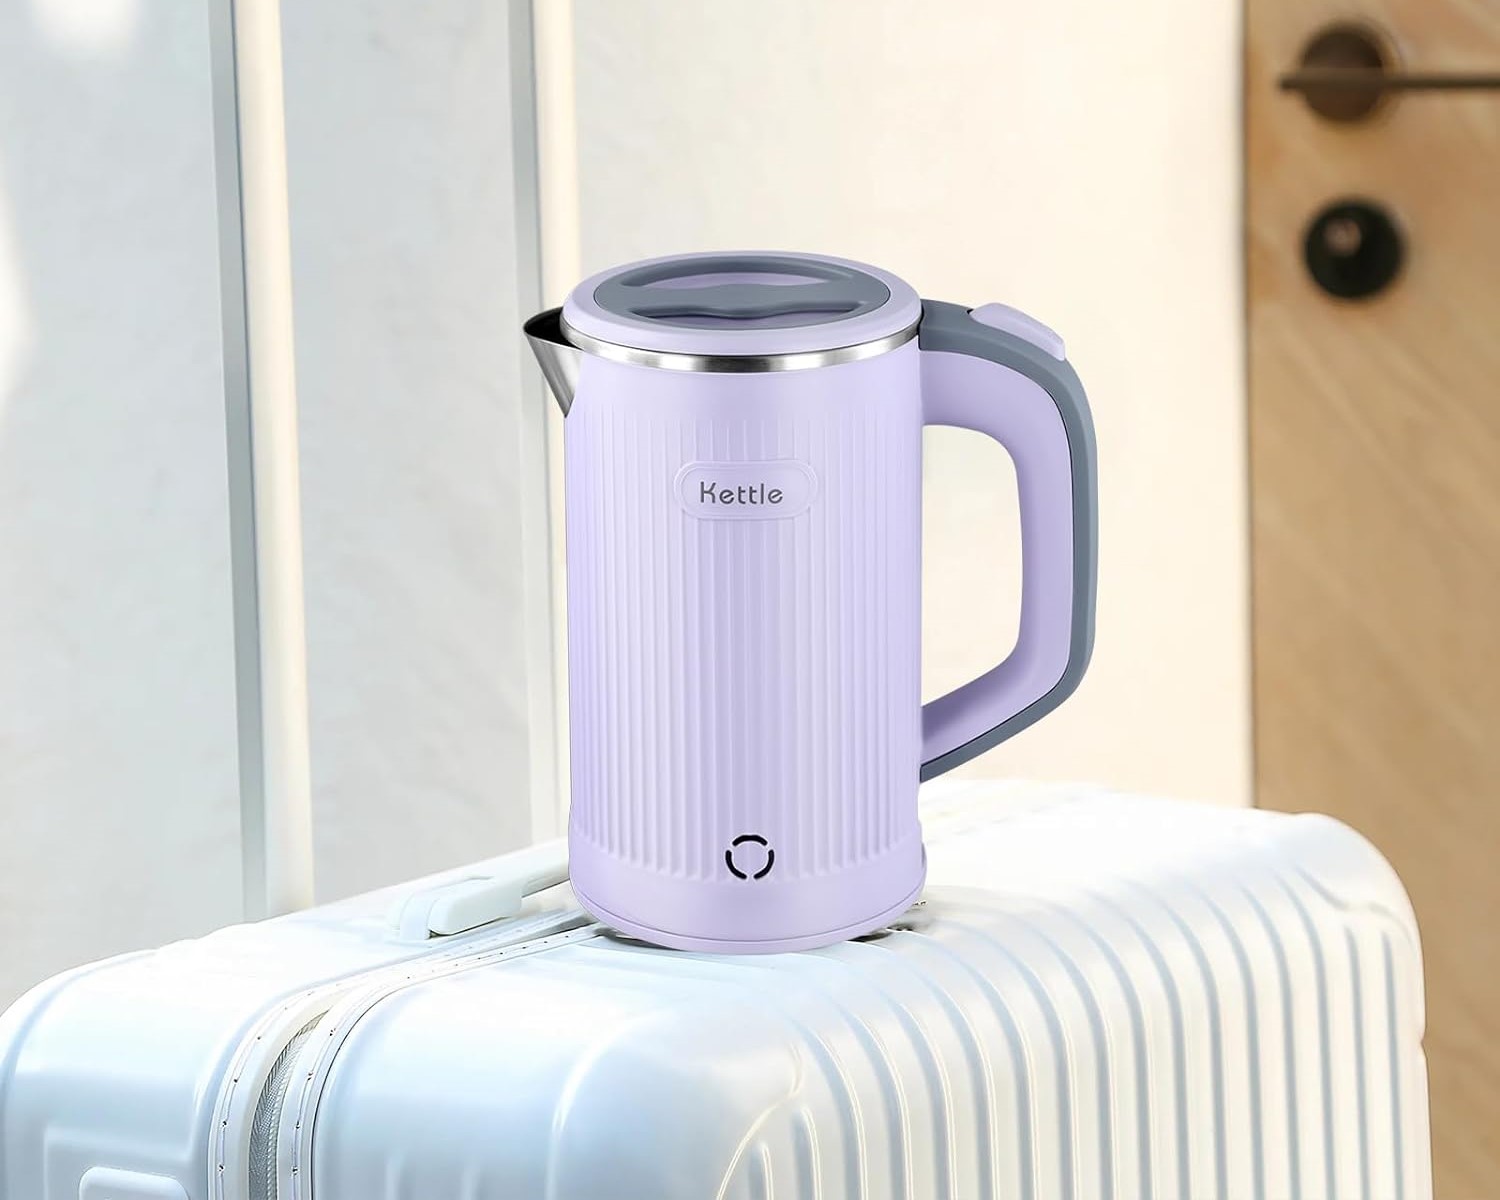 0.5L Portable Electric Kettle, Mini Travel Kettle, Stainless Steel Water Kettle - Perfect for Traveling Cooking Noodles, Boiling Water, Eggs